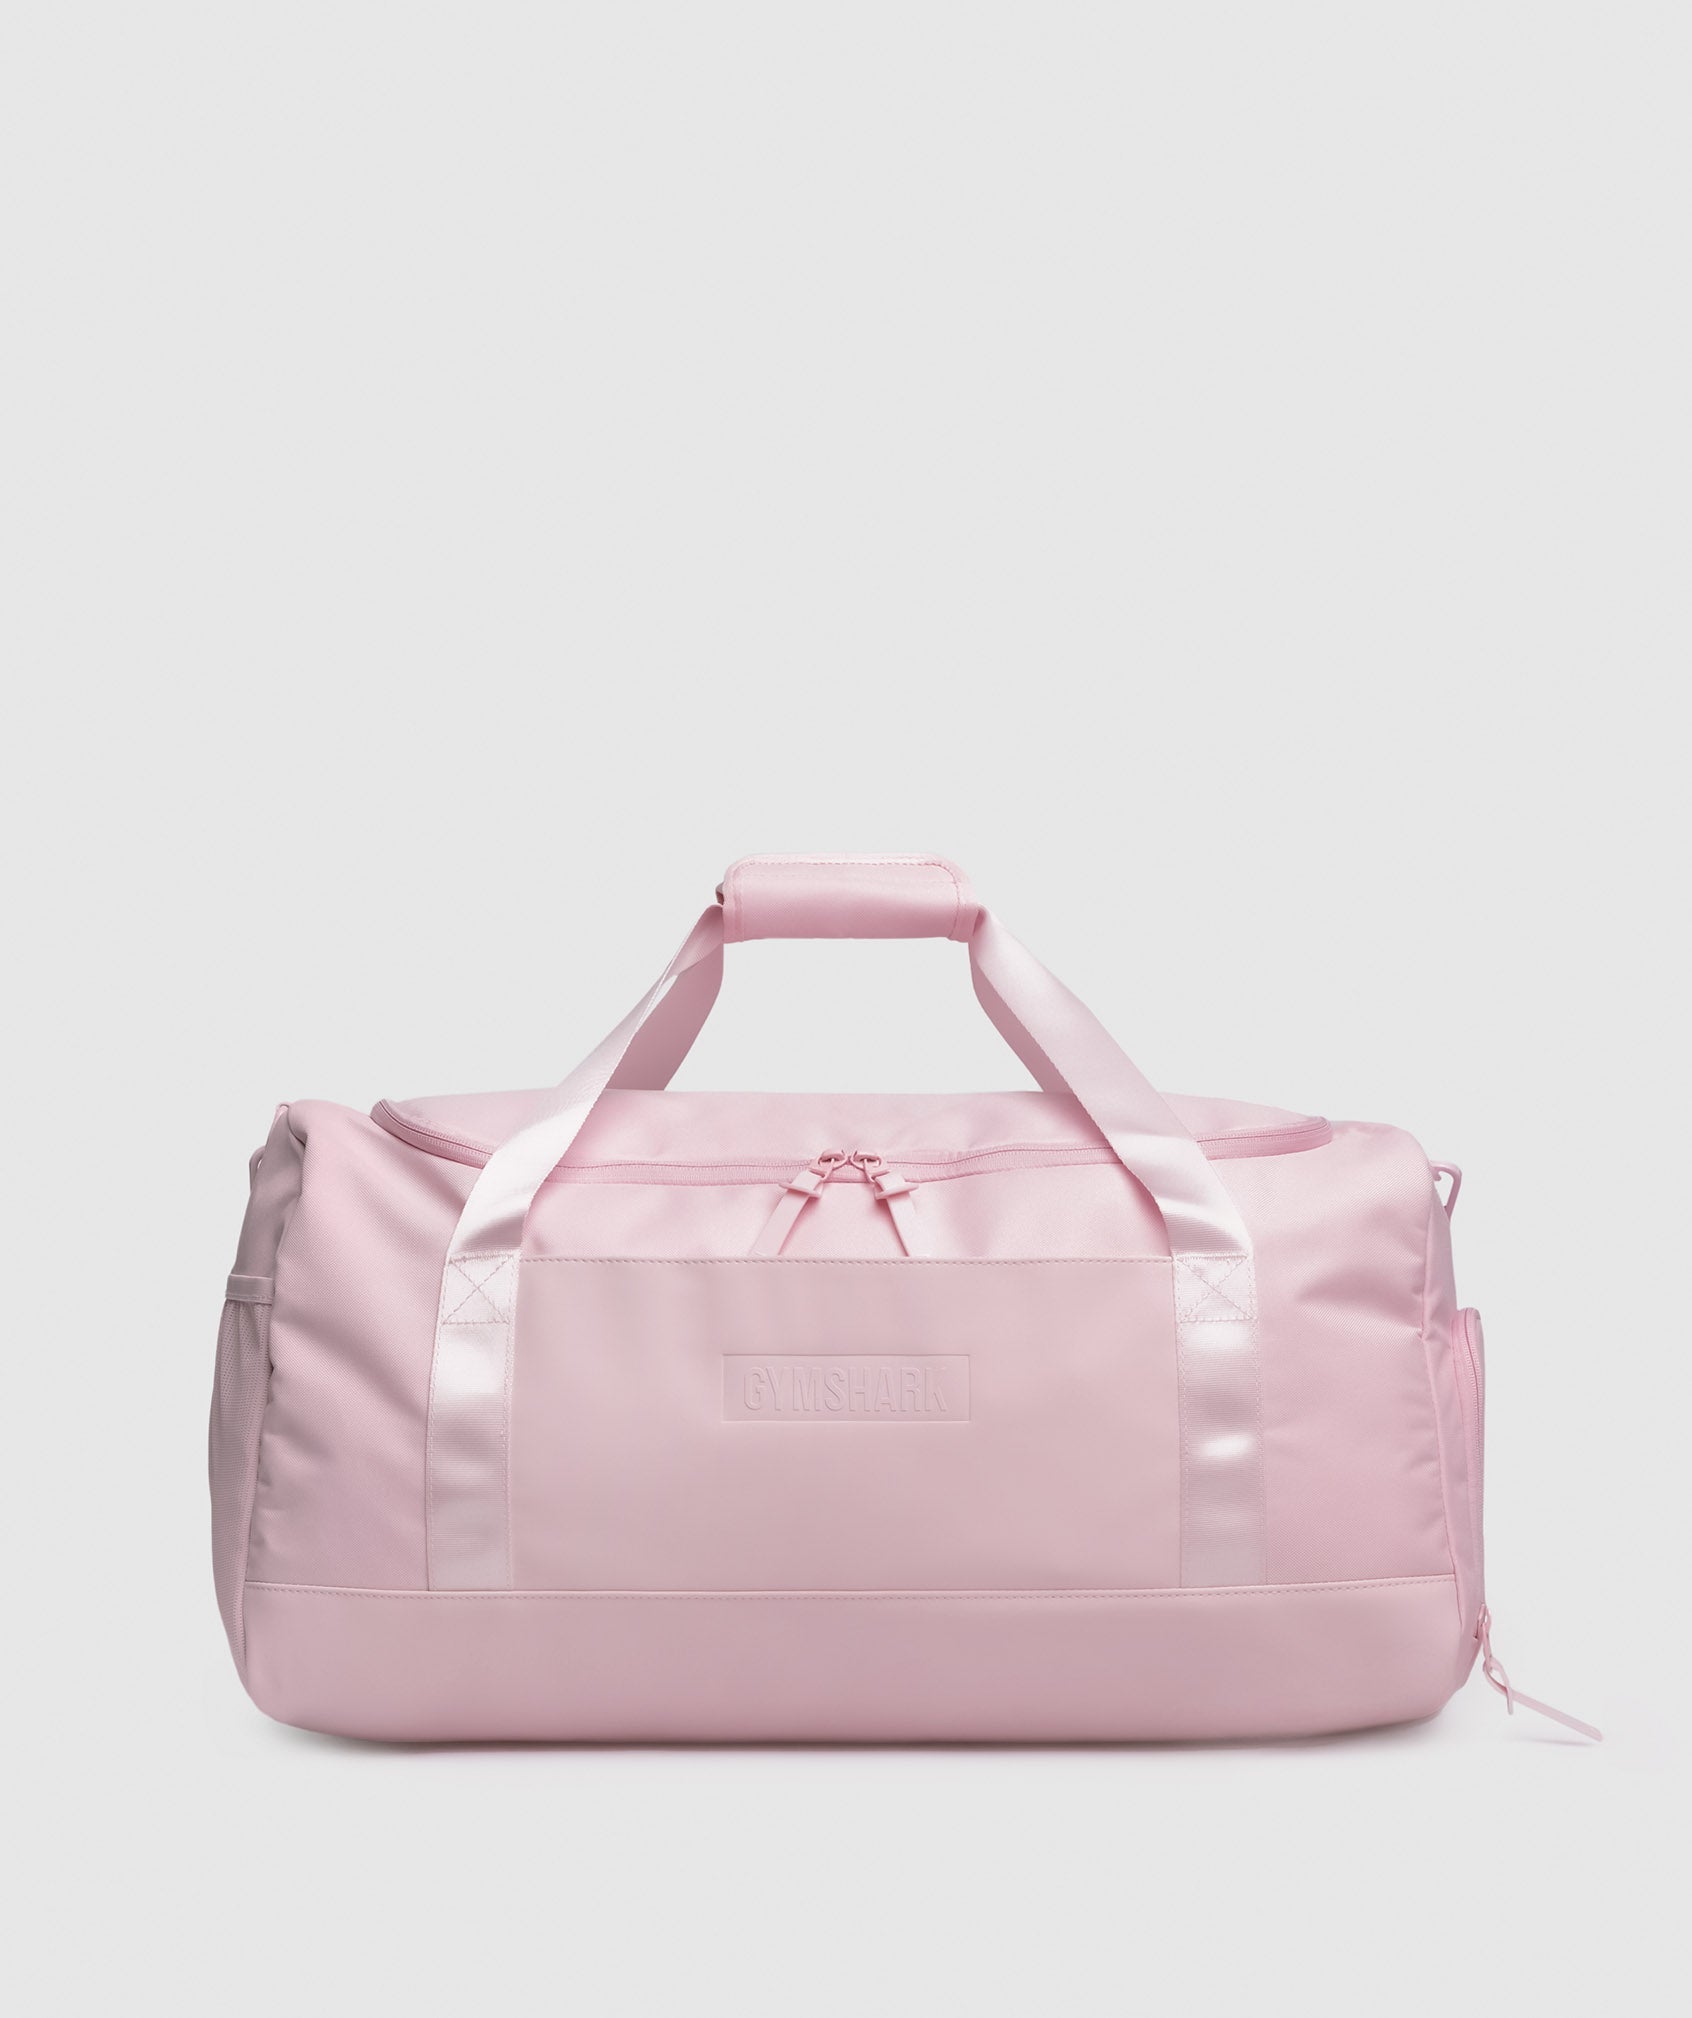 Gymshark Bags  Womens Everyday Holdall Small Raspberry Pink -  Mcvallescrivia